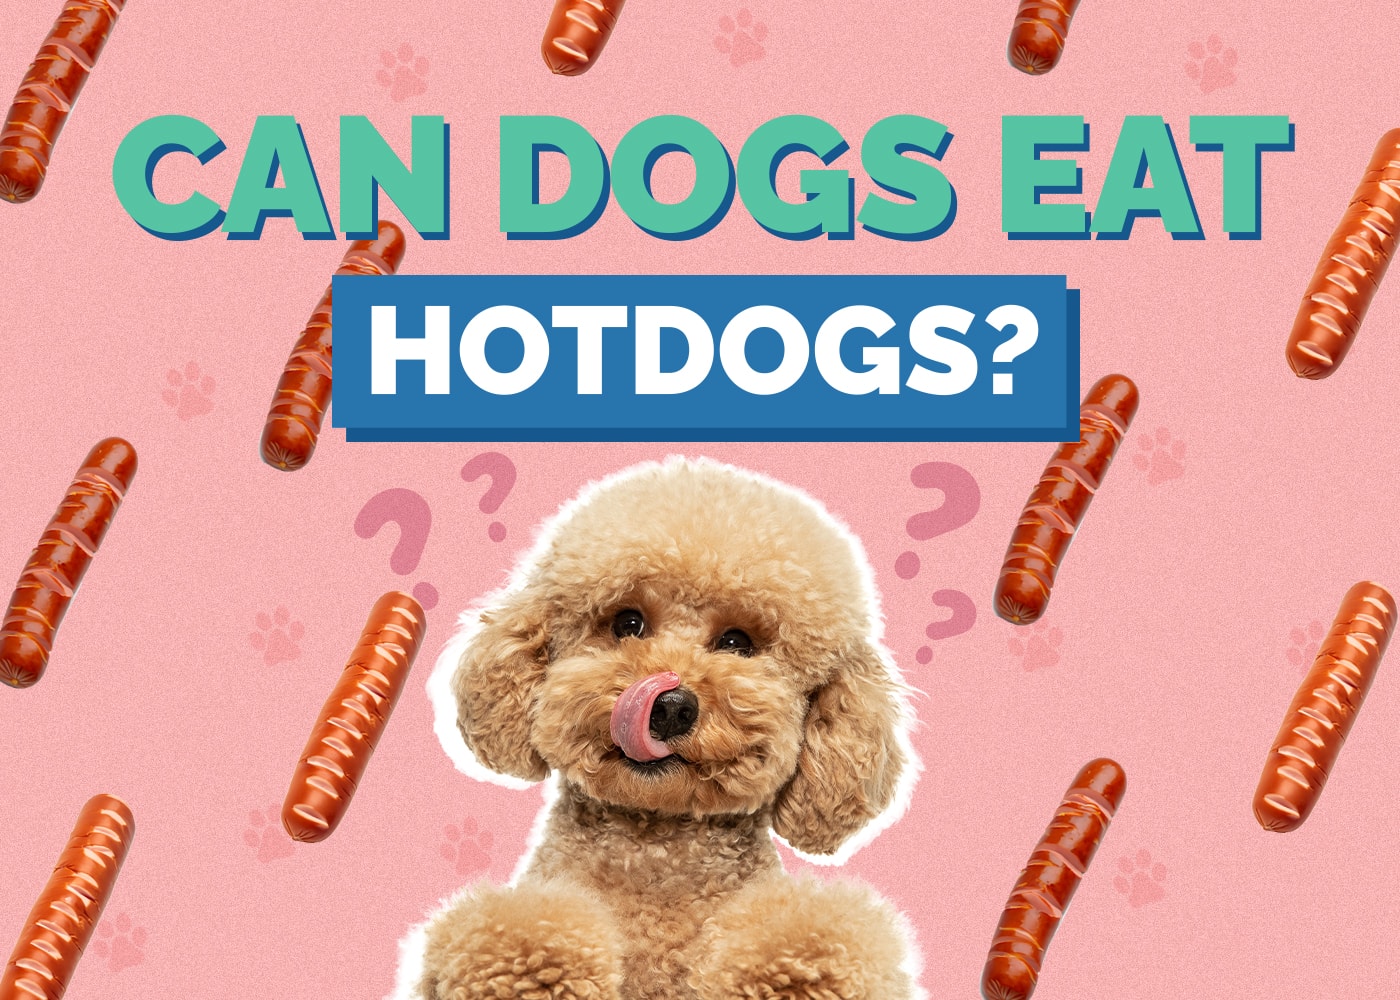 Can Dogs Eat hotdogs